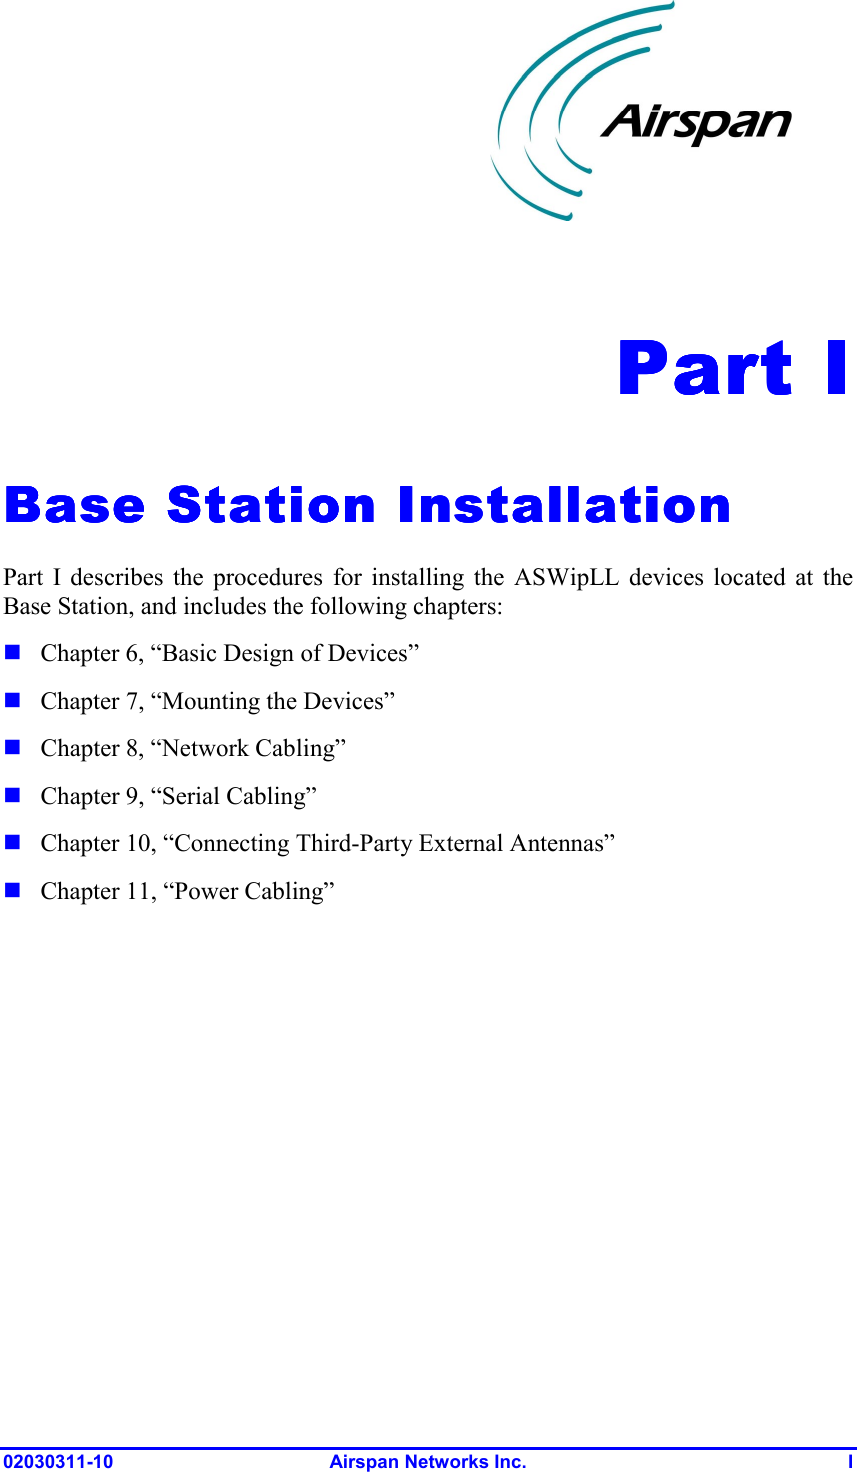  02030311-10 Airspan Networks Inc.  I Part IPart IPart IPart I    Base Station InstallationBase Station InstallationBase Station InstallationBase Station Installation    Part I describes the procedures for installing the ASWipLL devices located at the Base Station, and includes the following chapters:  Chapter 6, “Basic Design of Devices”  Chapter 7, “Mounting the Devices”  Chapter 8, “Network Cabling”  Chapter 9, “Serial Cabling”  Chapter 10, “Connecting Third-Party External Antennas”  Chapter 11, “Power Cabling”  